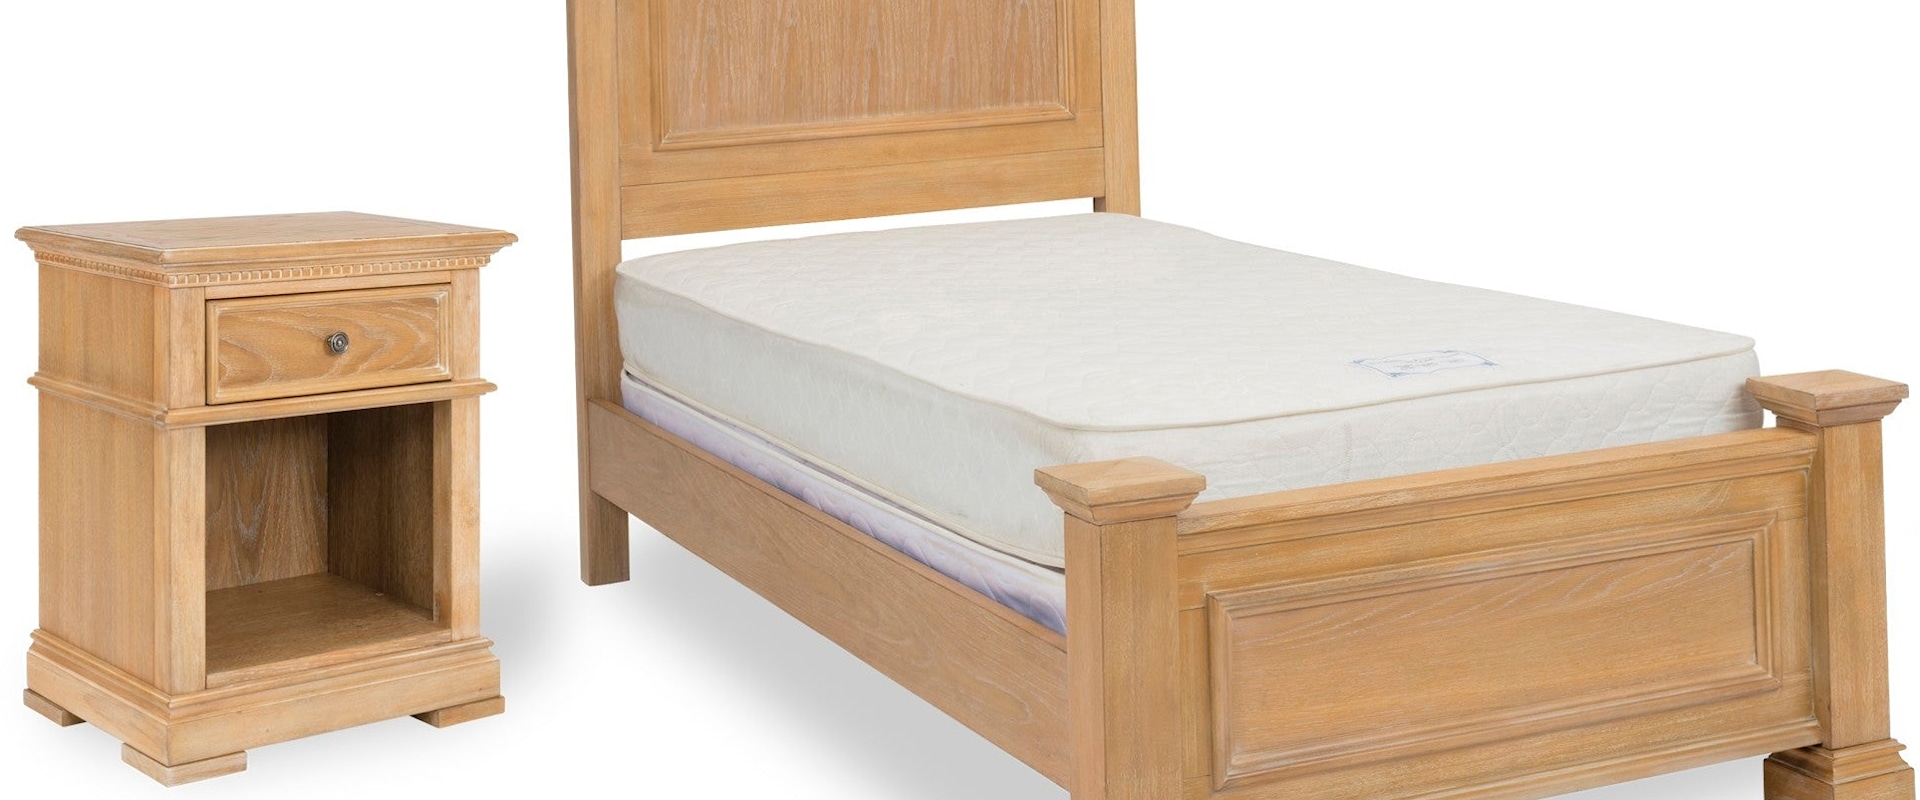 Traditional Twin Bed and Nightstand Set with White Oak Finish